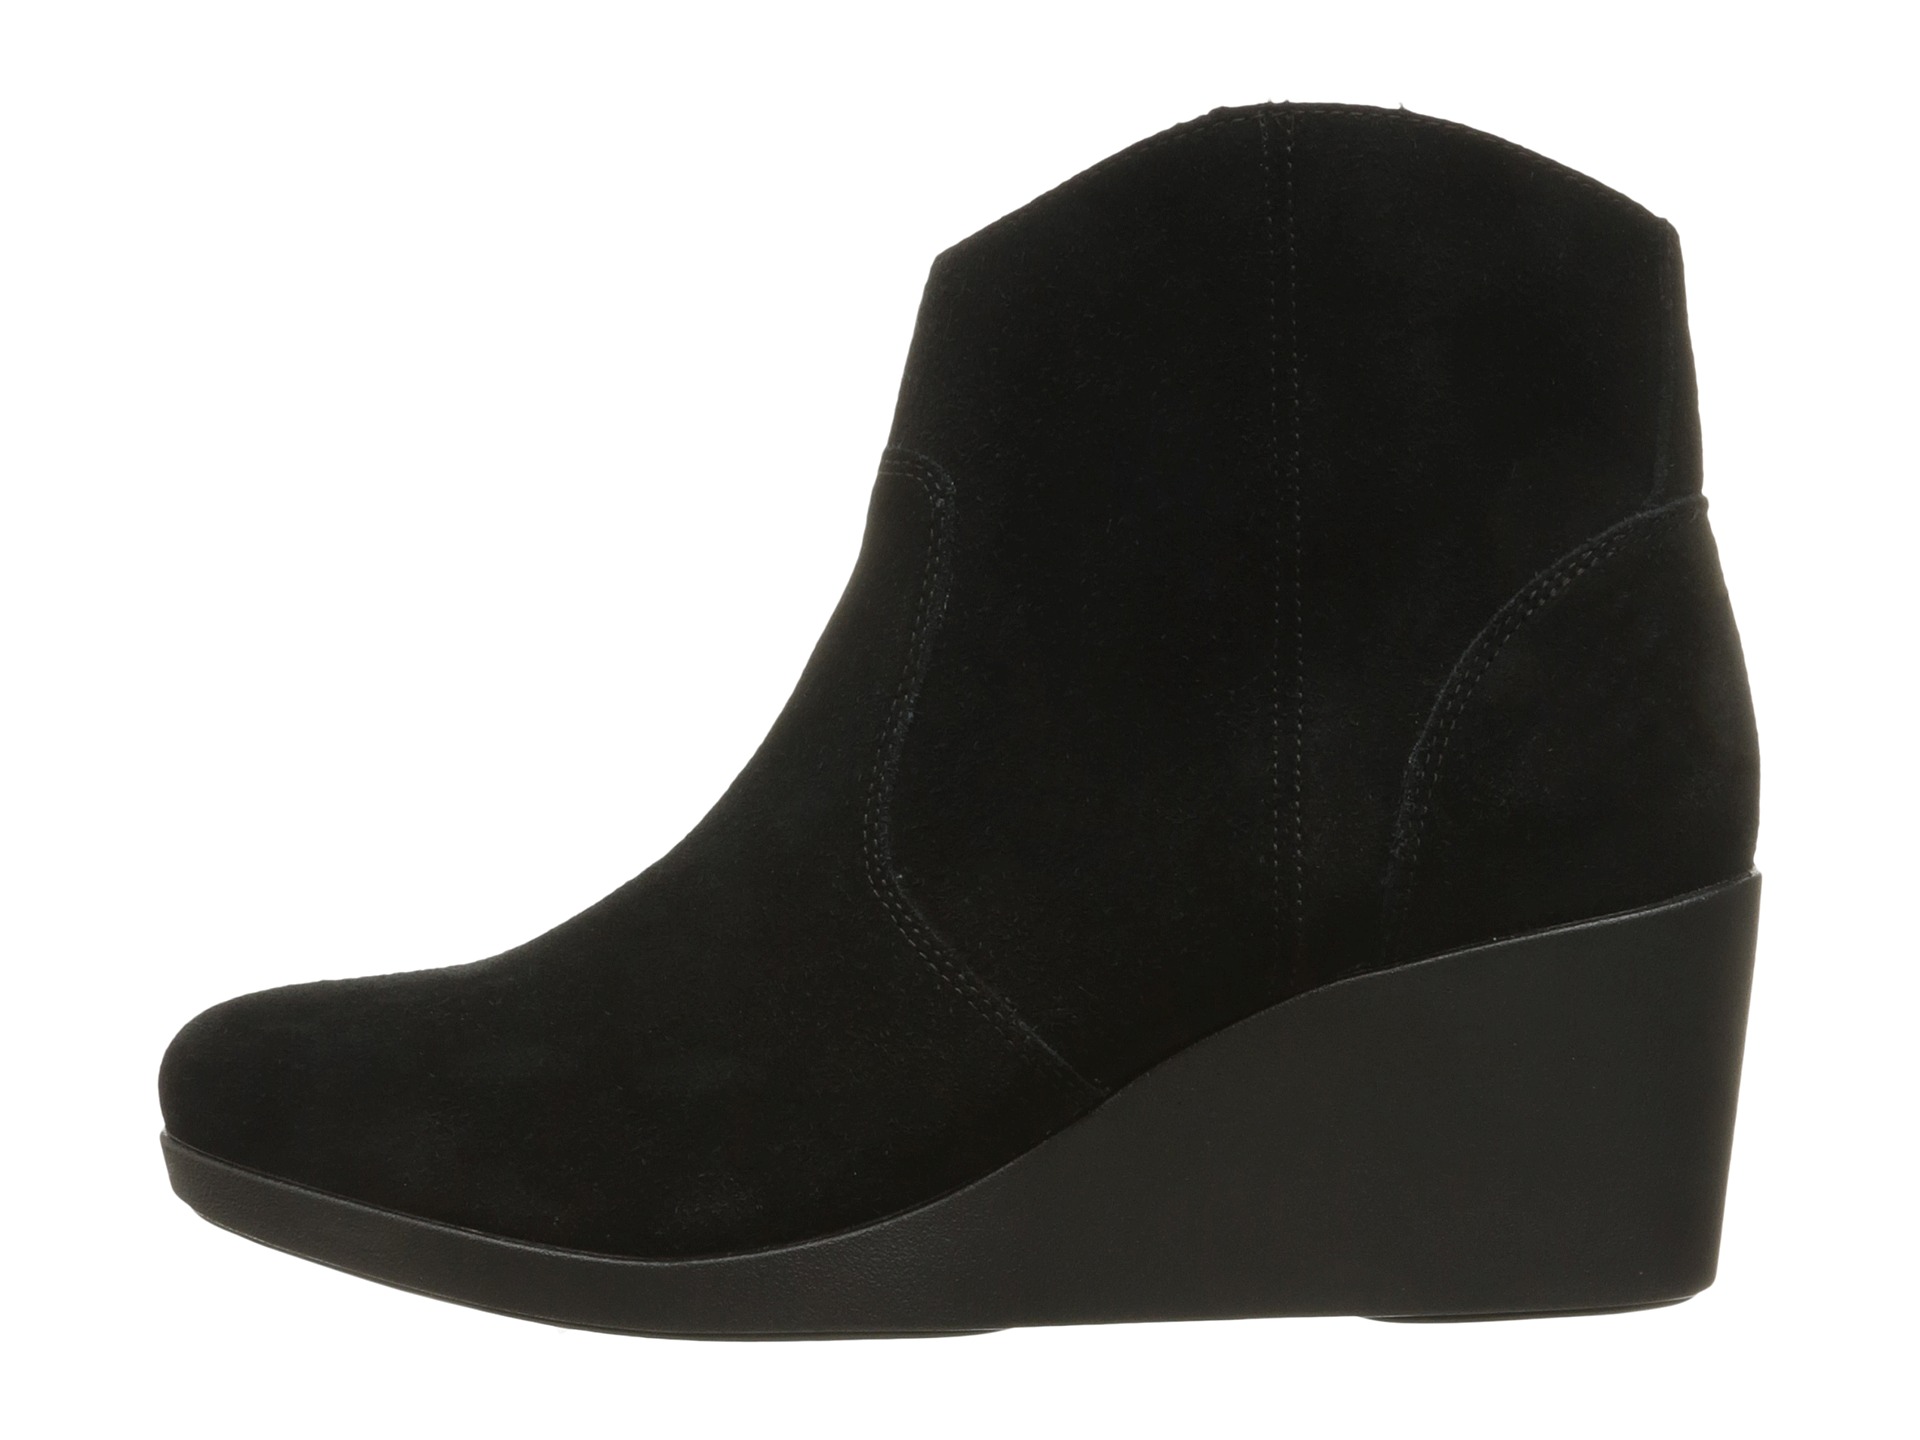 Crocs Leigh Suede Wedge Bootie Black - Zappos.com Free Shipping BOTH Ways